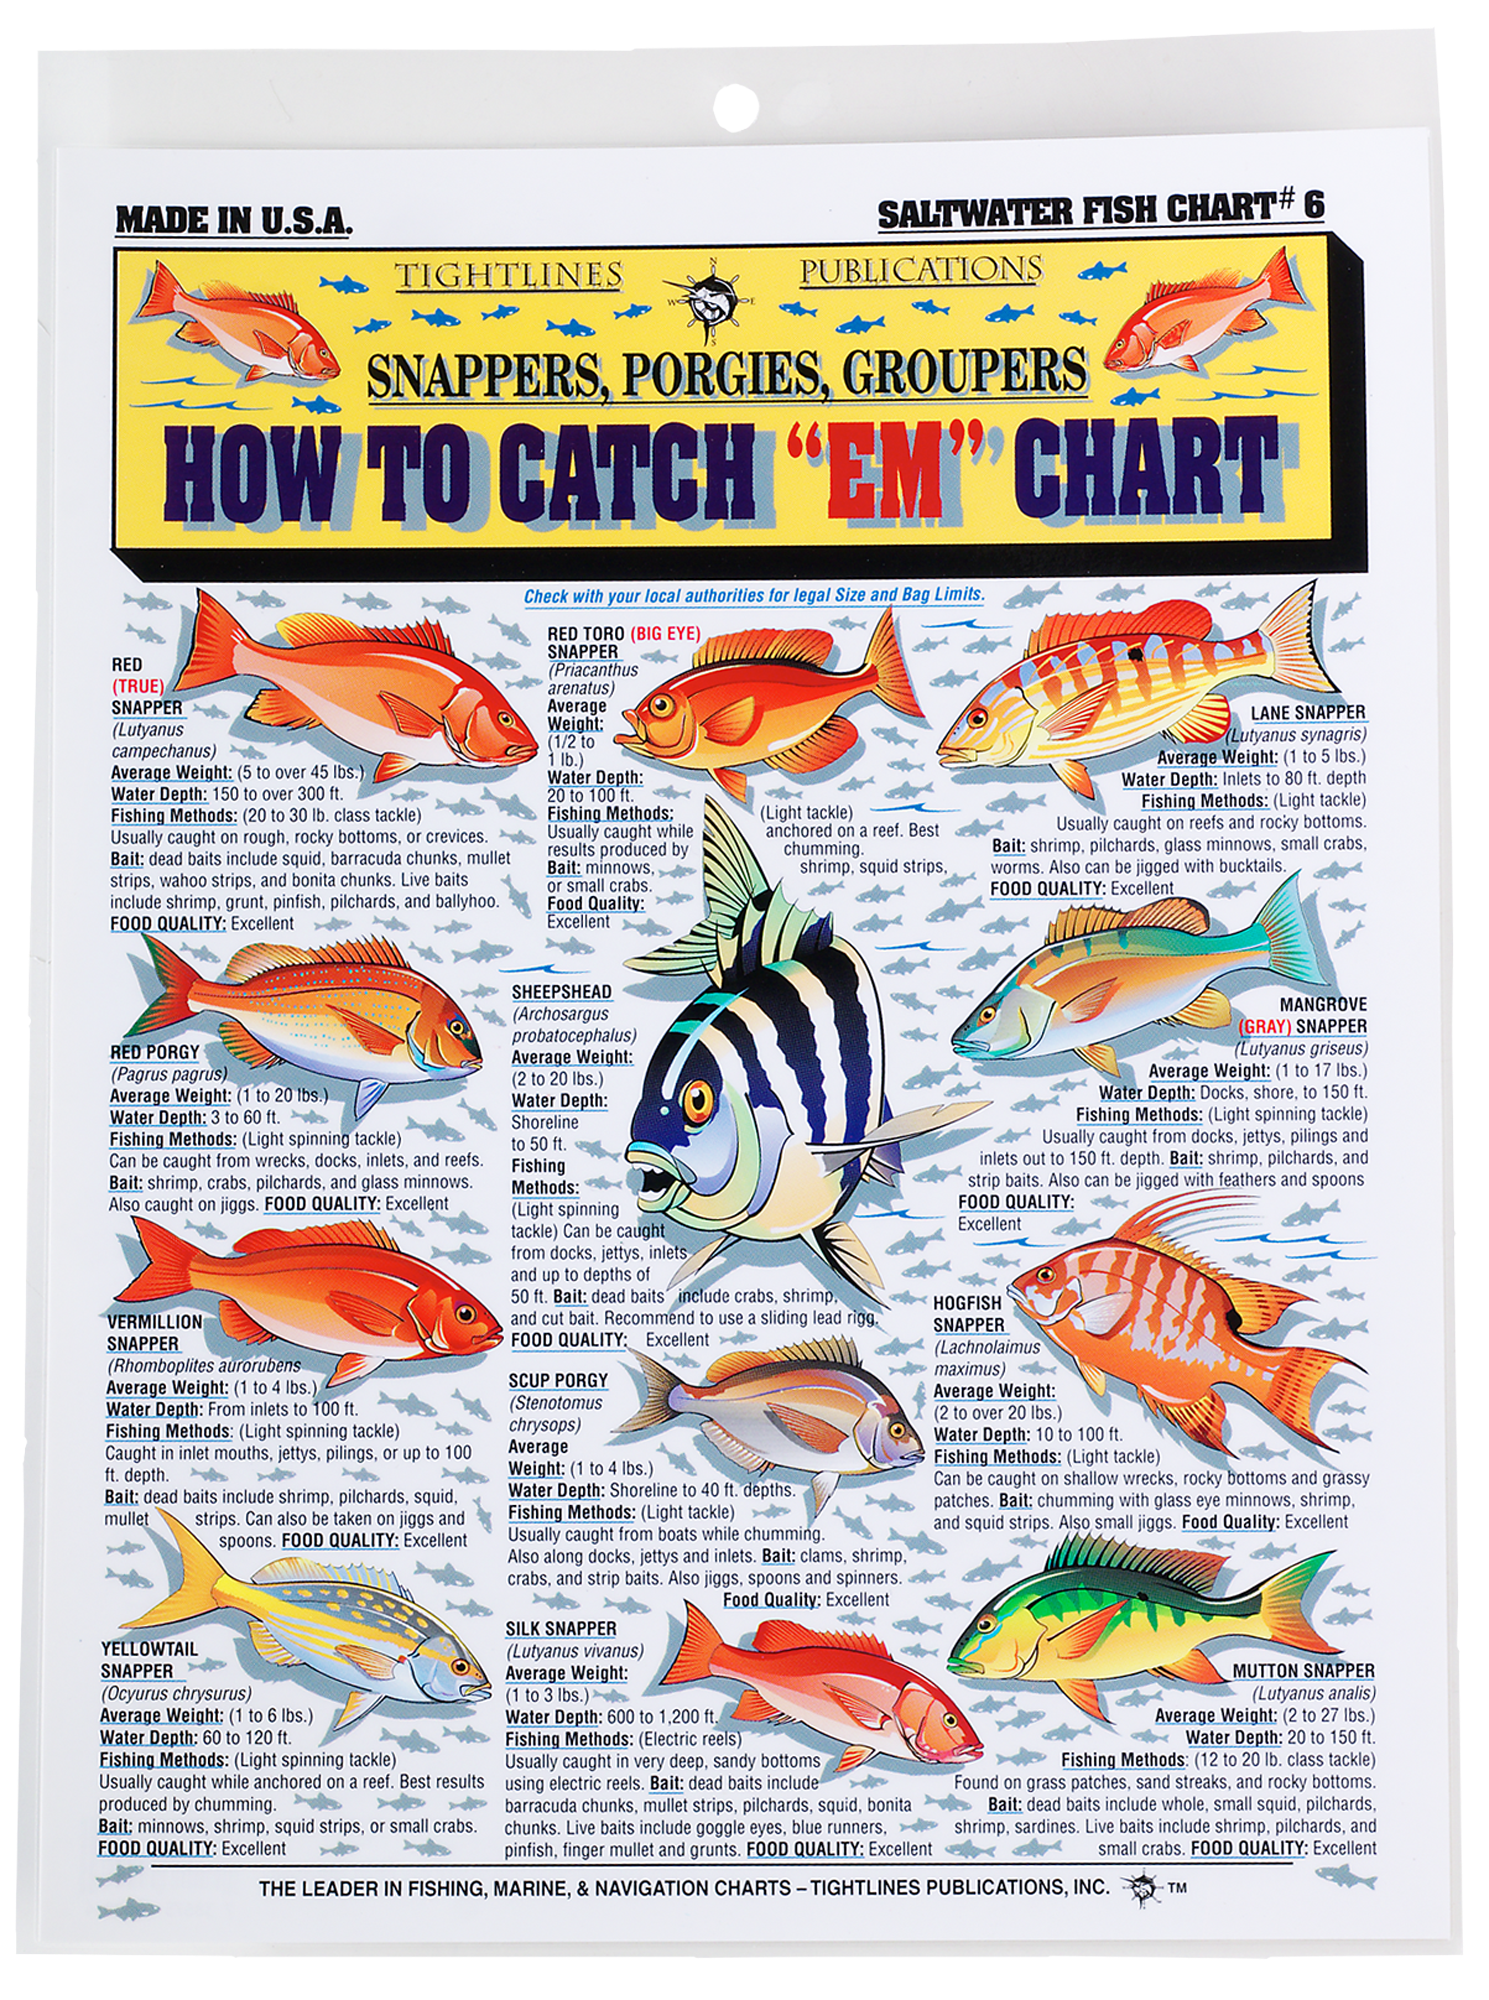 How to Catch EM Chart - Saltwater Fish Chart #6